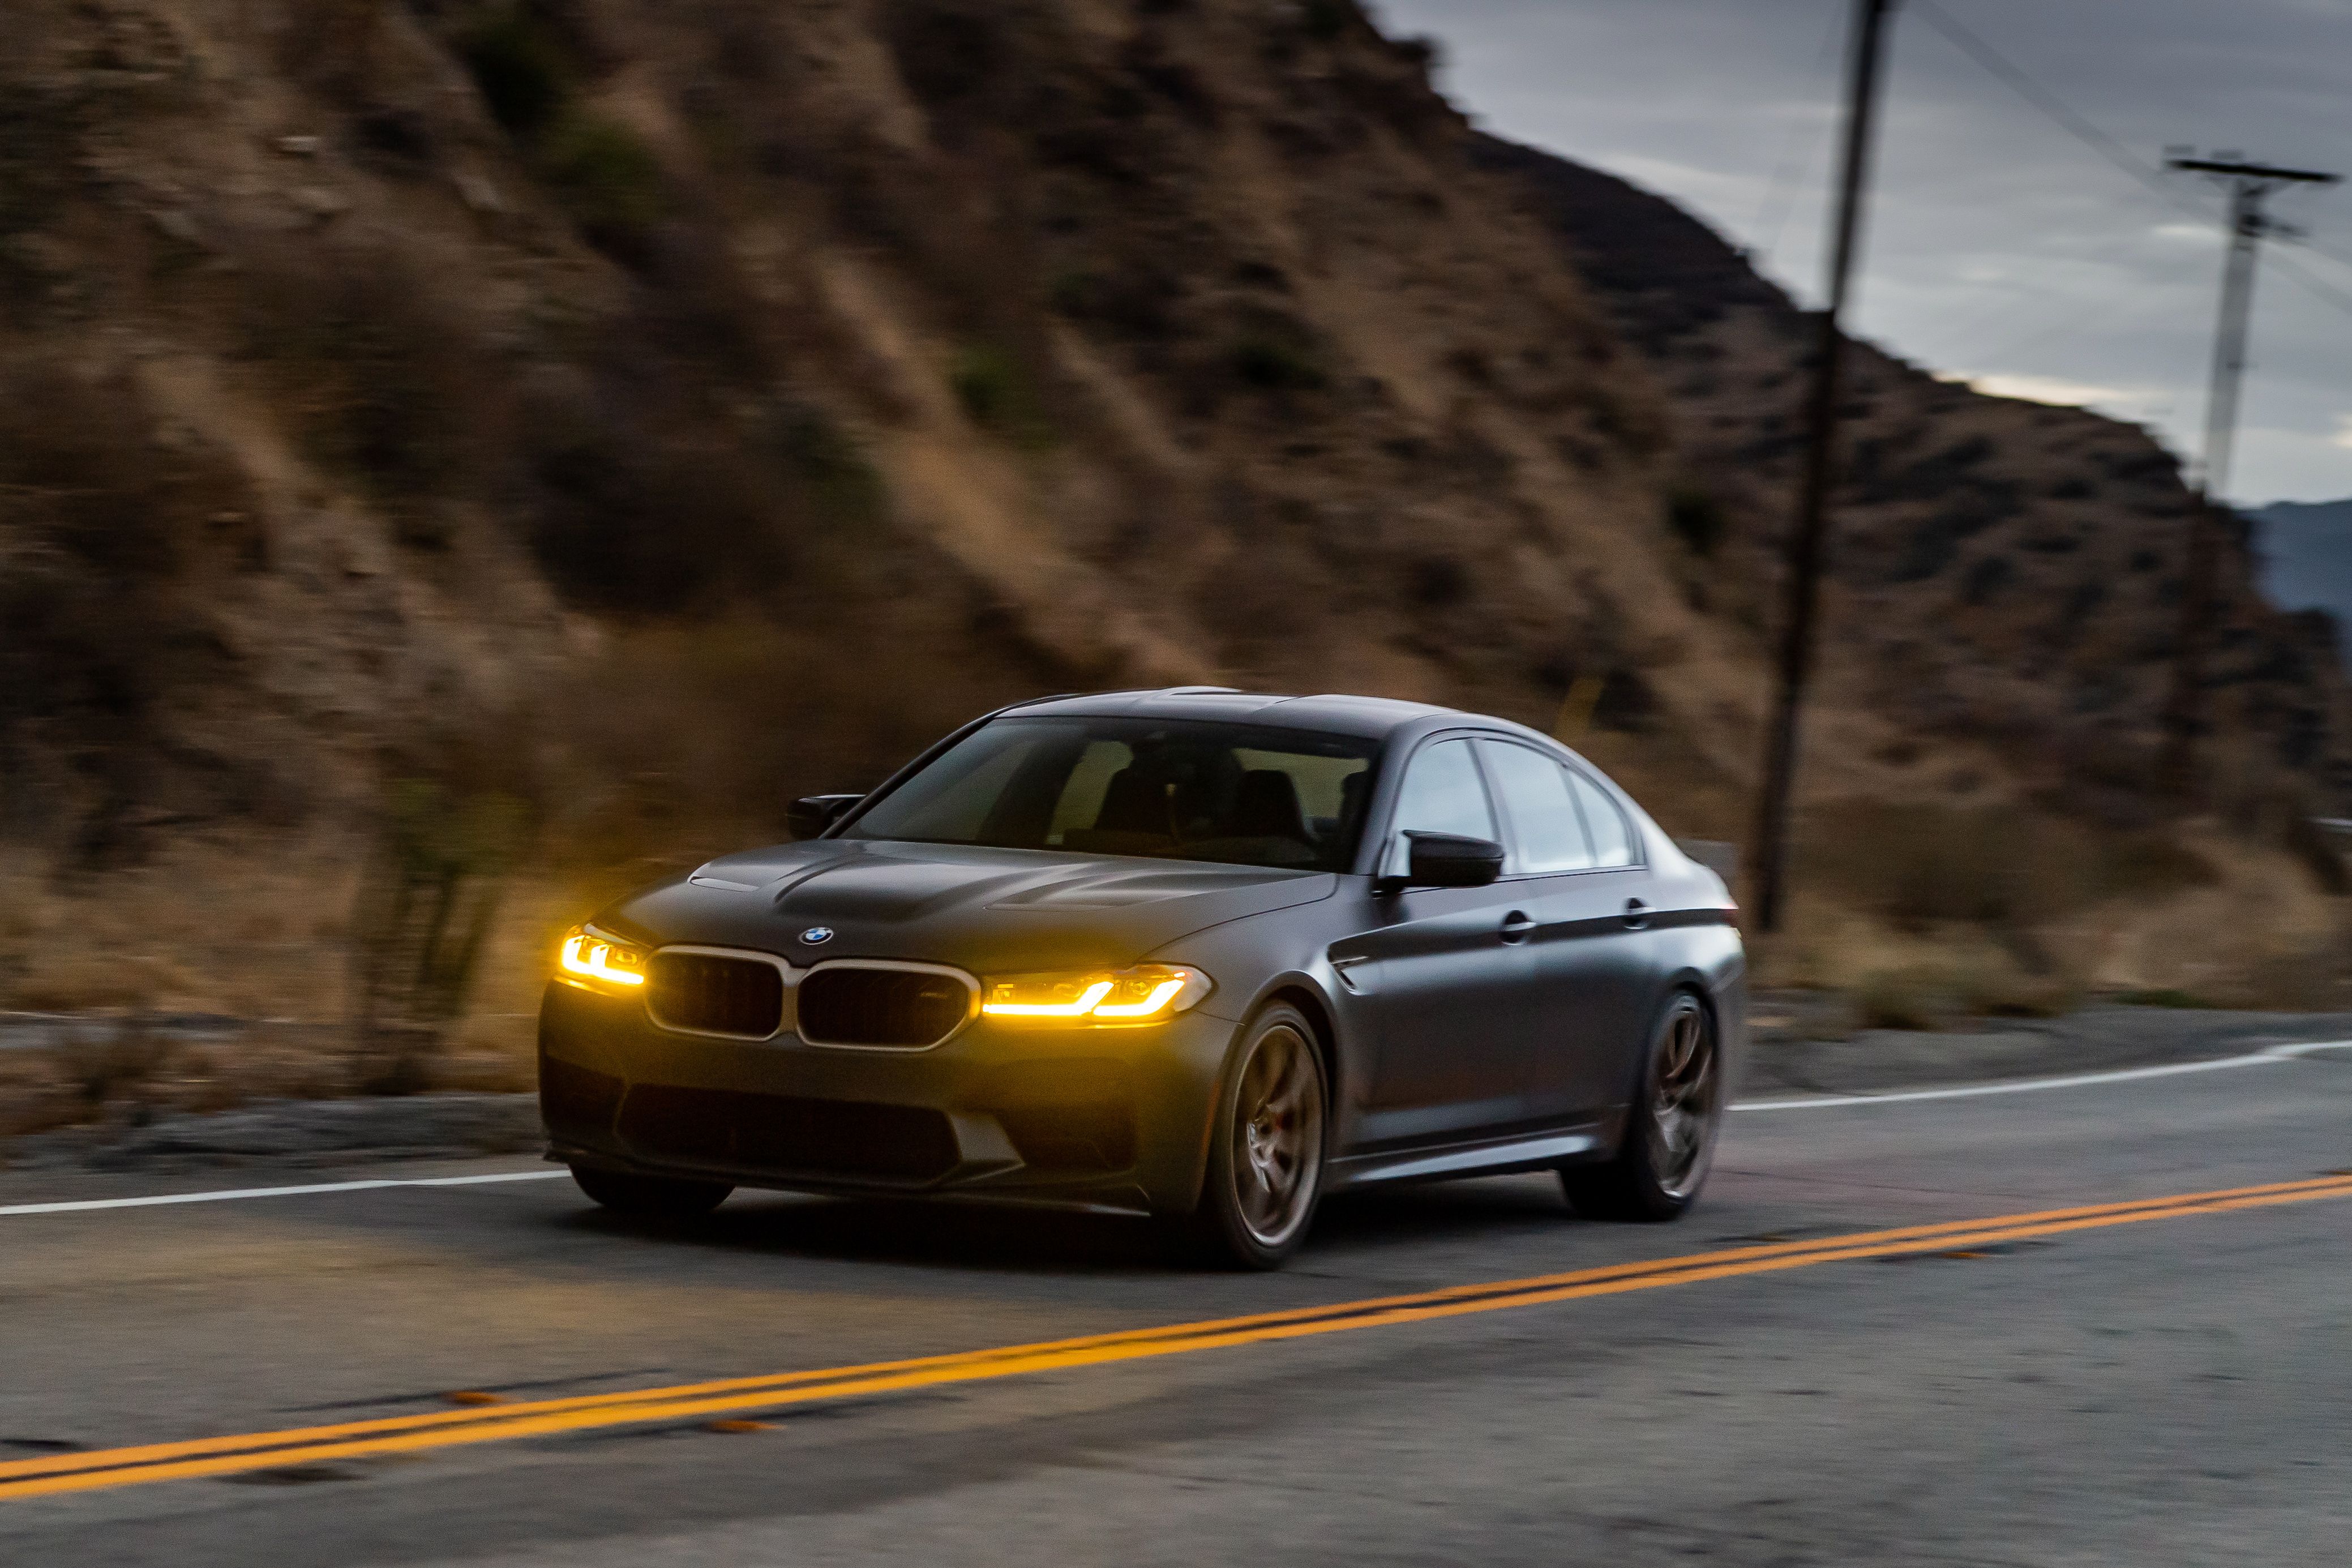 View Photos of the 2022 BMW M5 CS